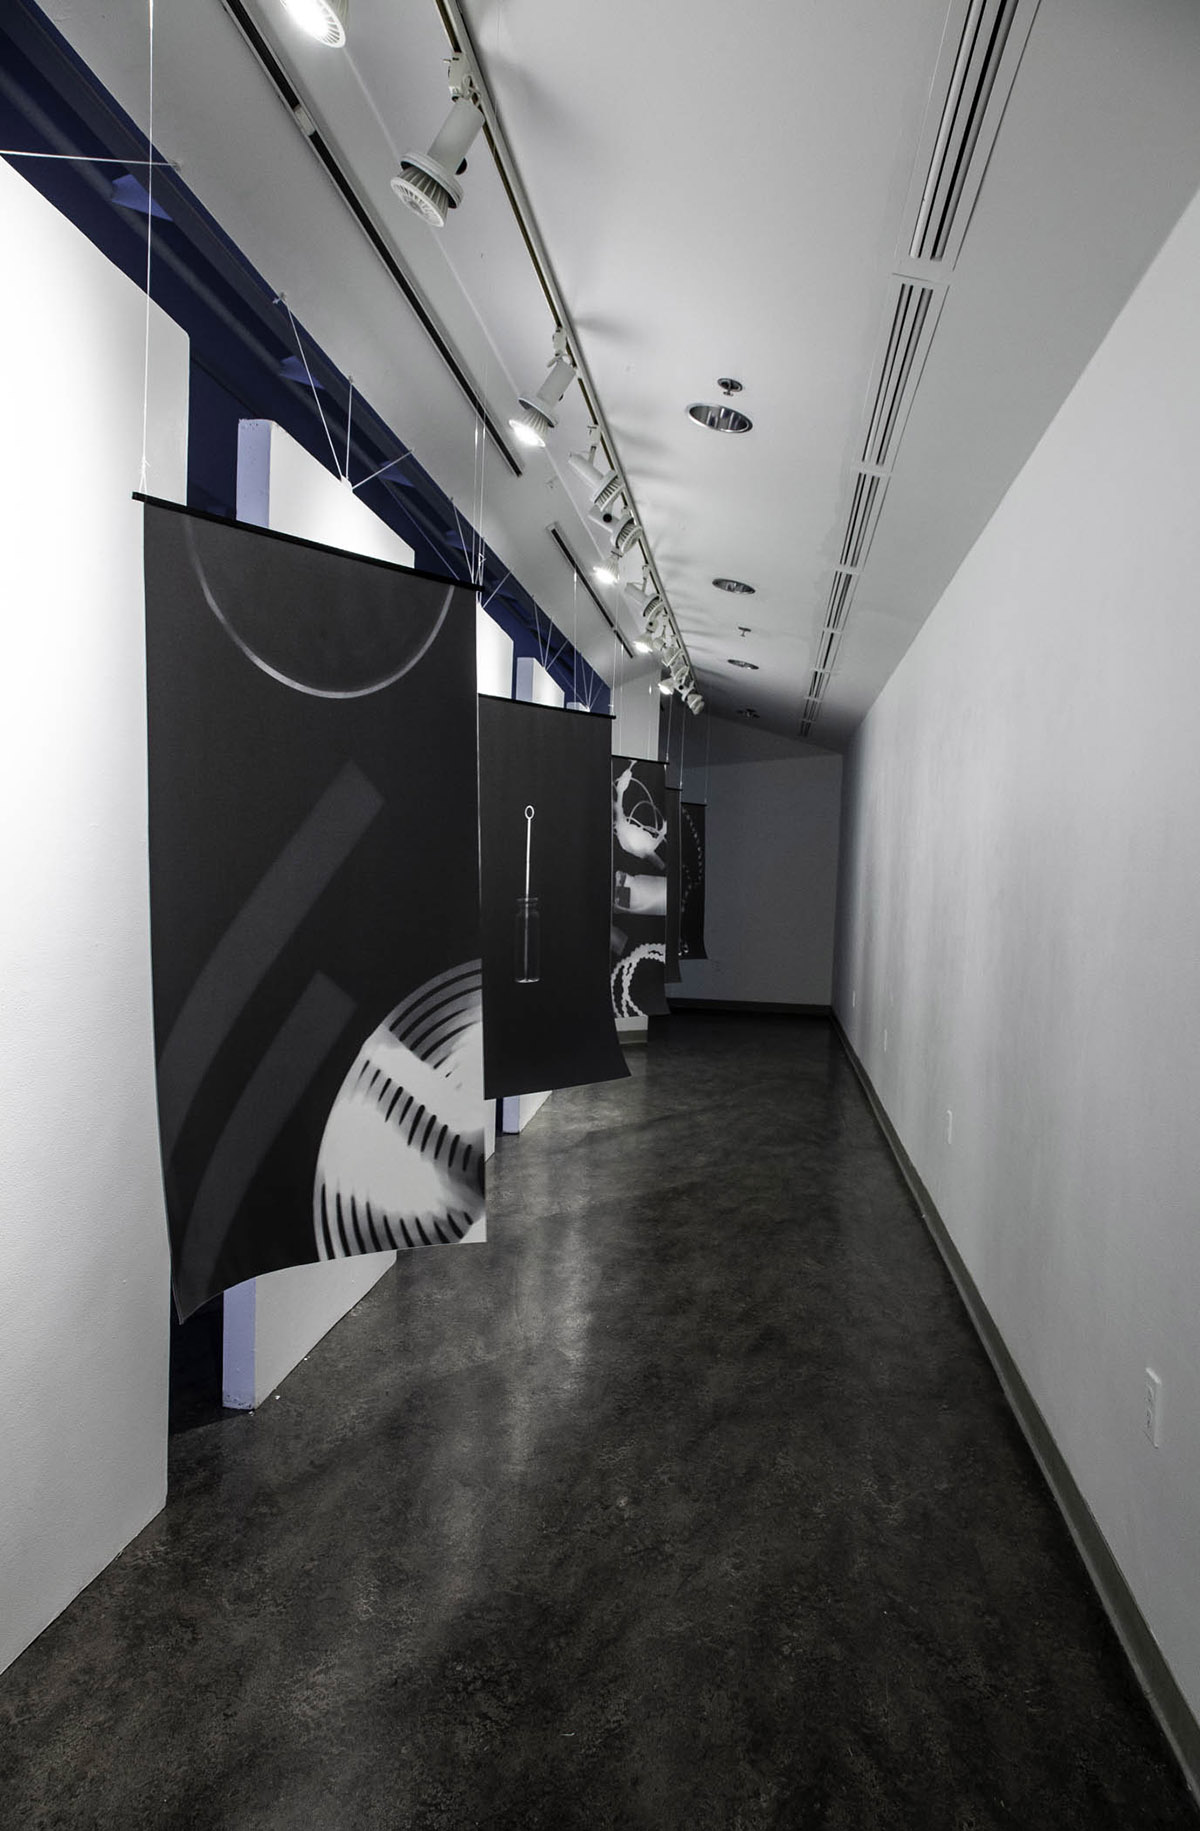 Images of black and white photograms by Dan Paz hanging from the ceiling of an art gallery